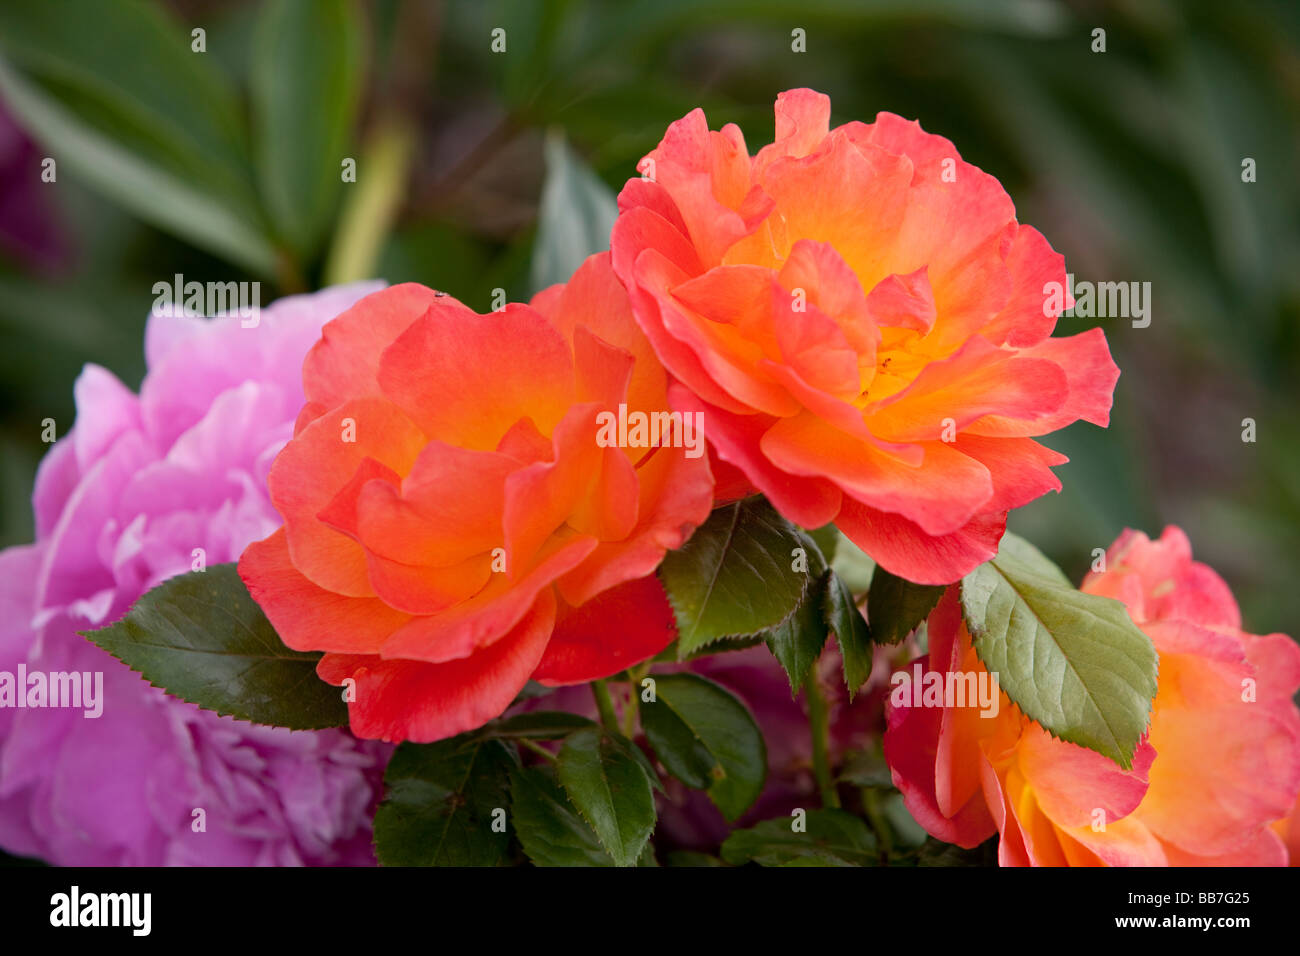 Peony and rose flowers Stock Photo